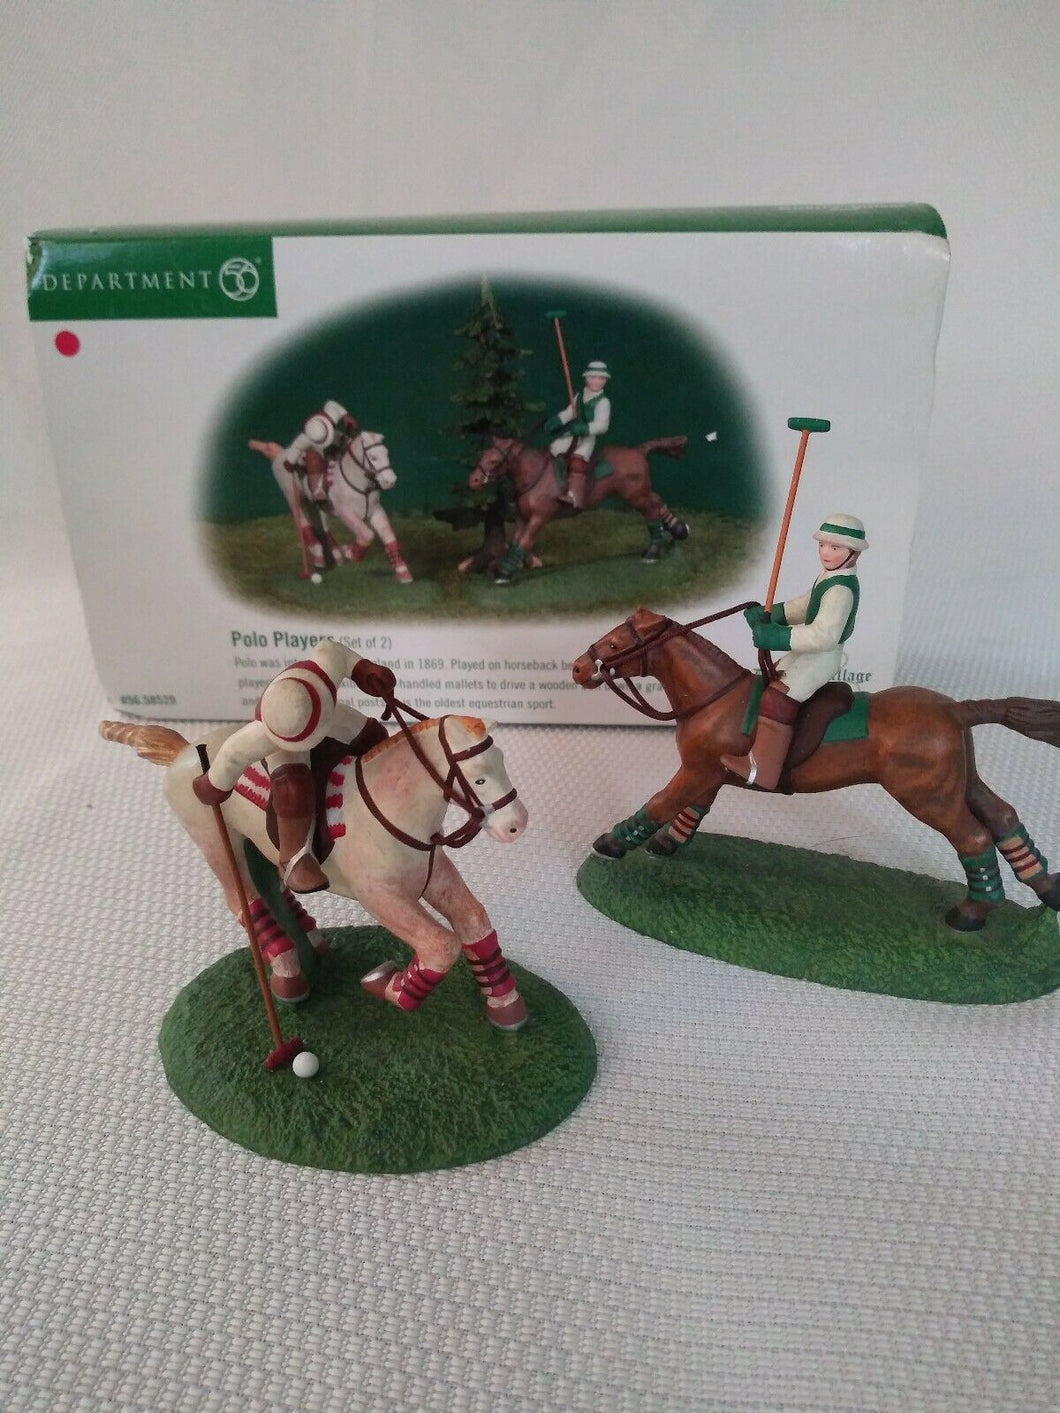 Department 56 Dickens' Village Polo Players